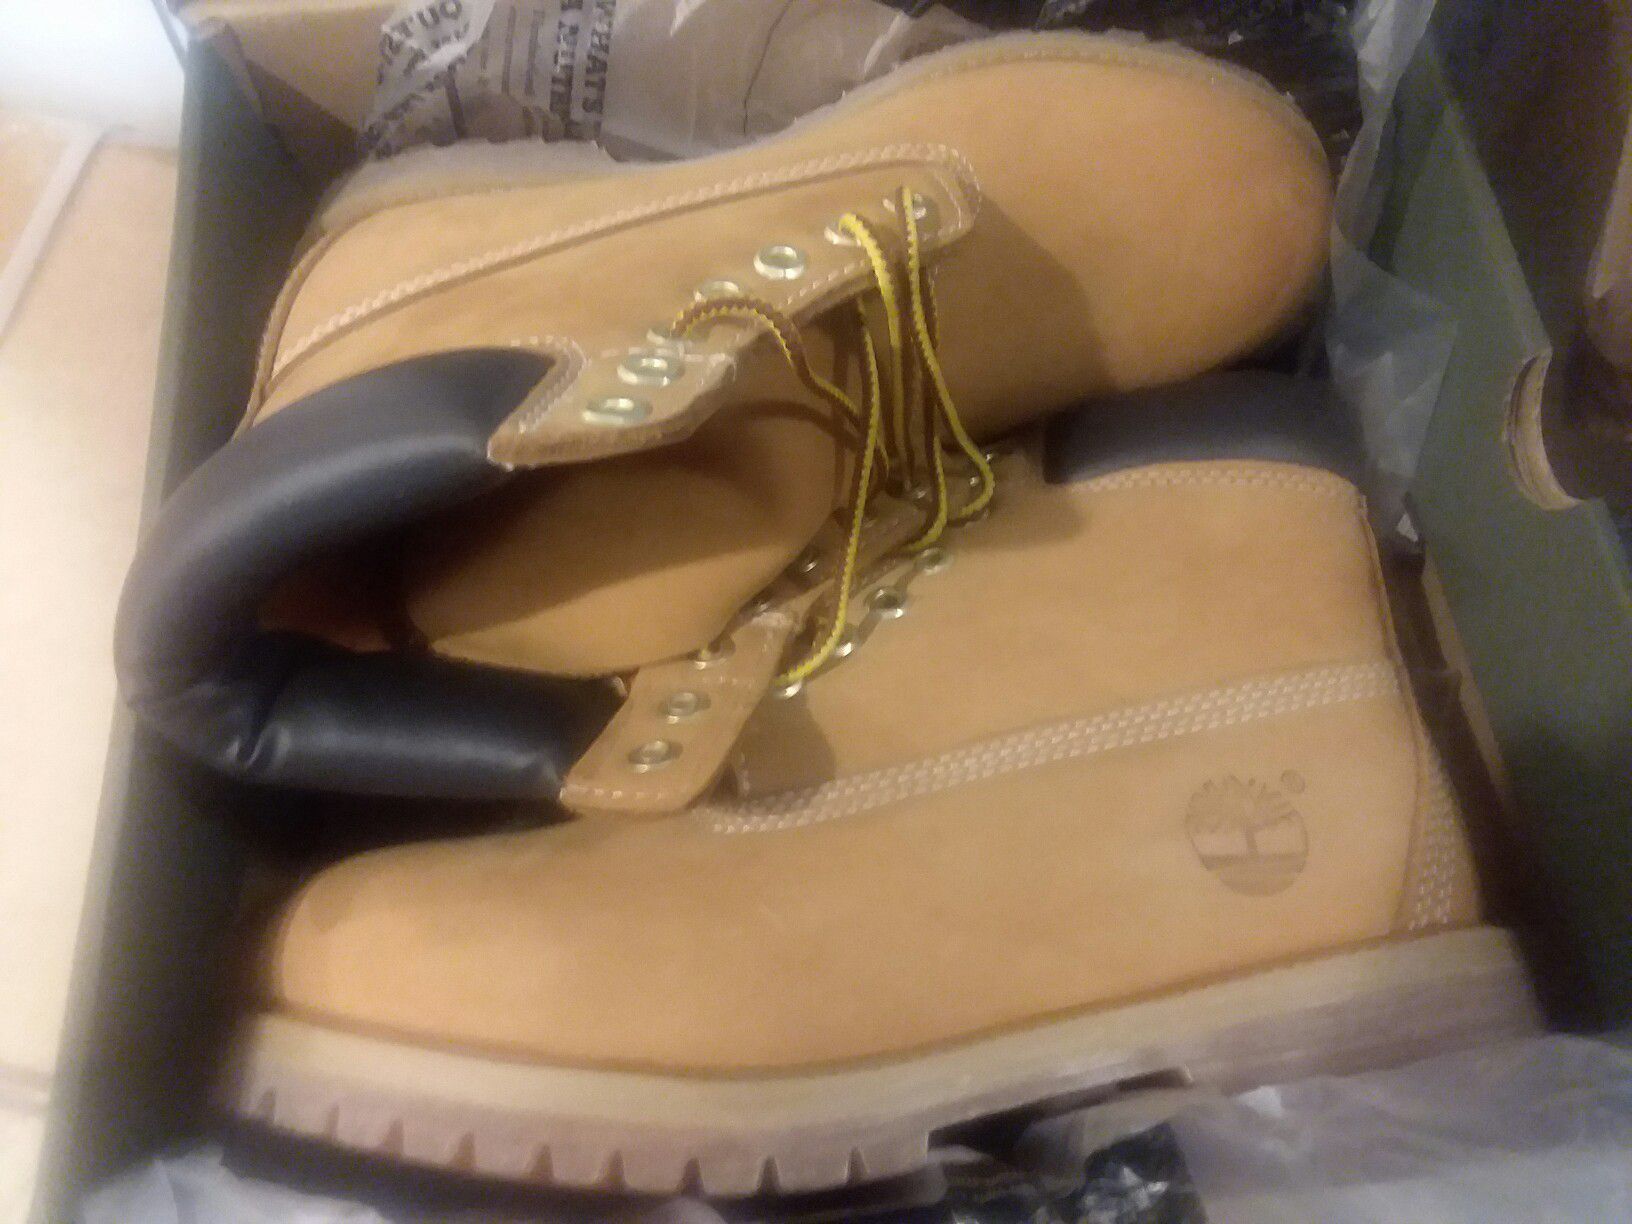 NEW Mens Timberland wheat boots size 7